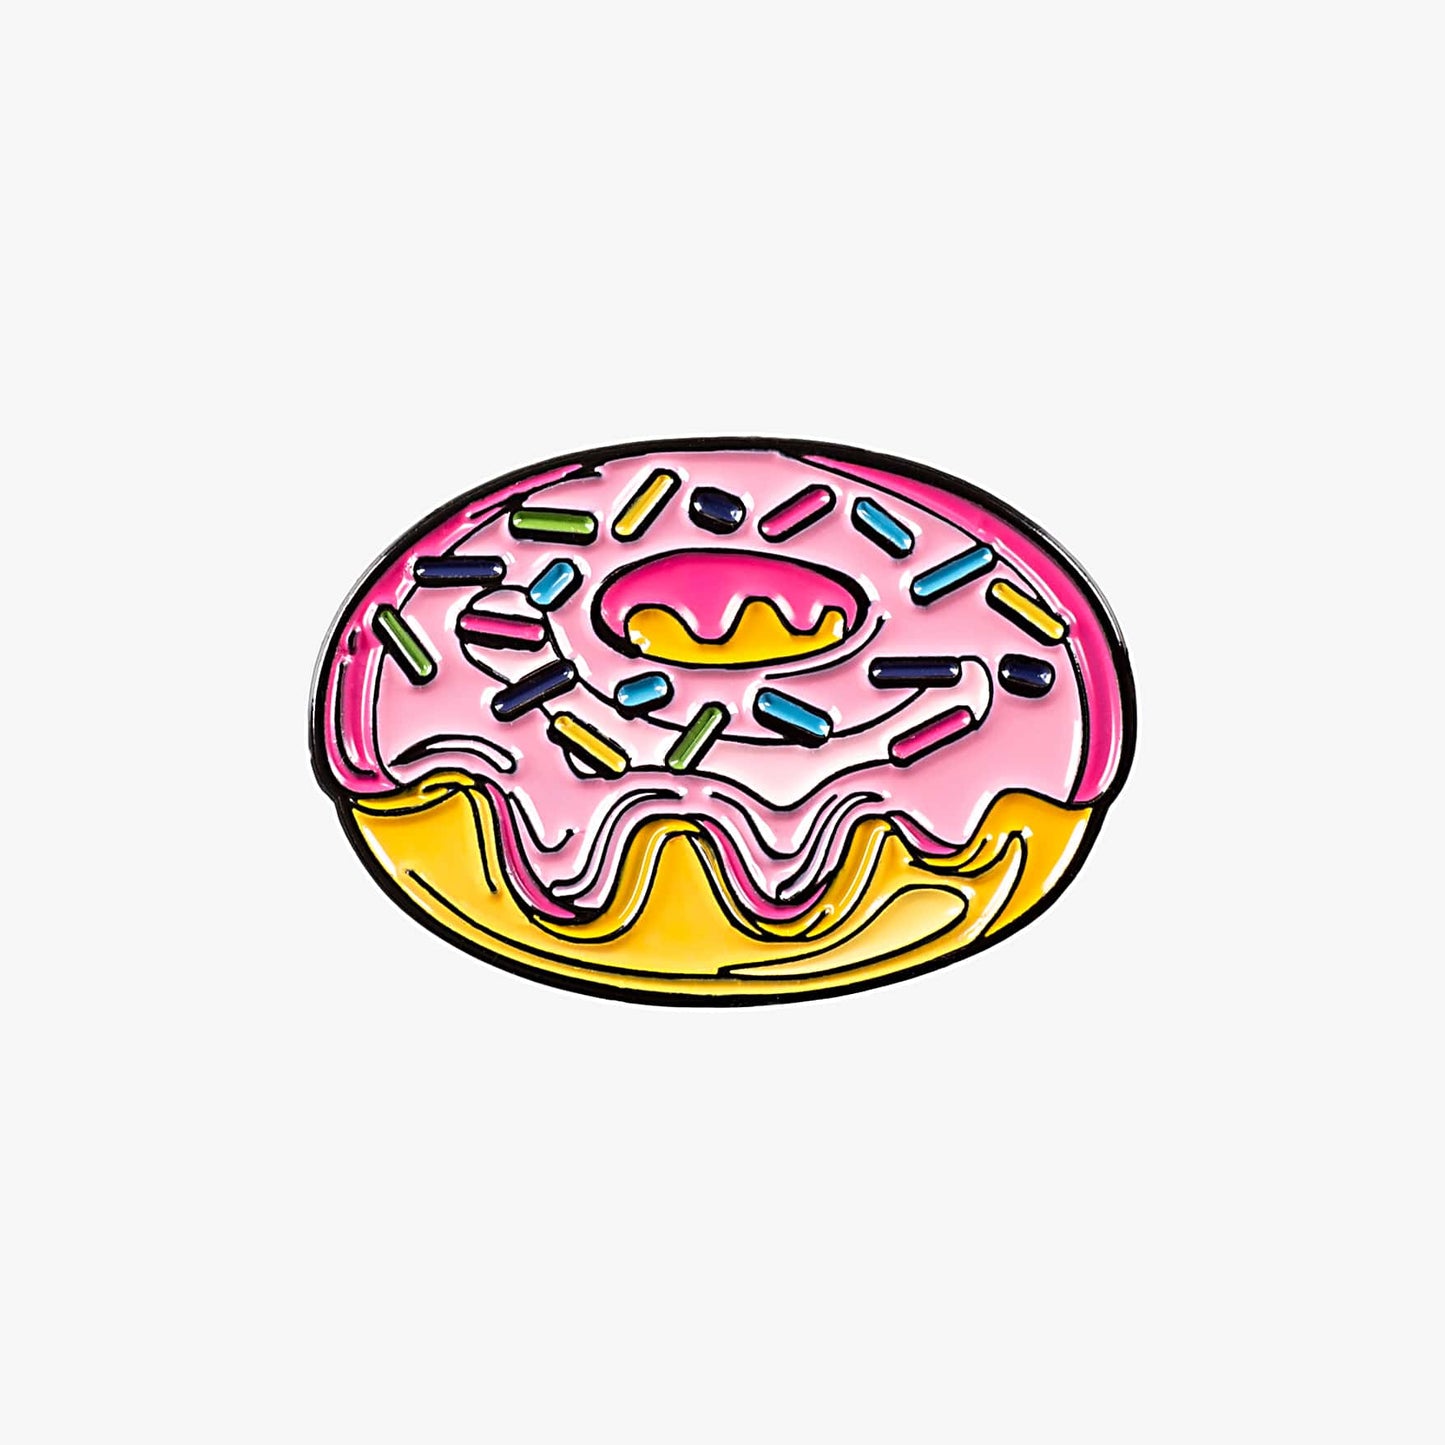 Cool ball marker for golf with donut design